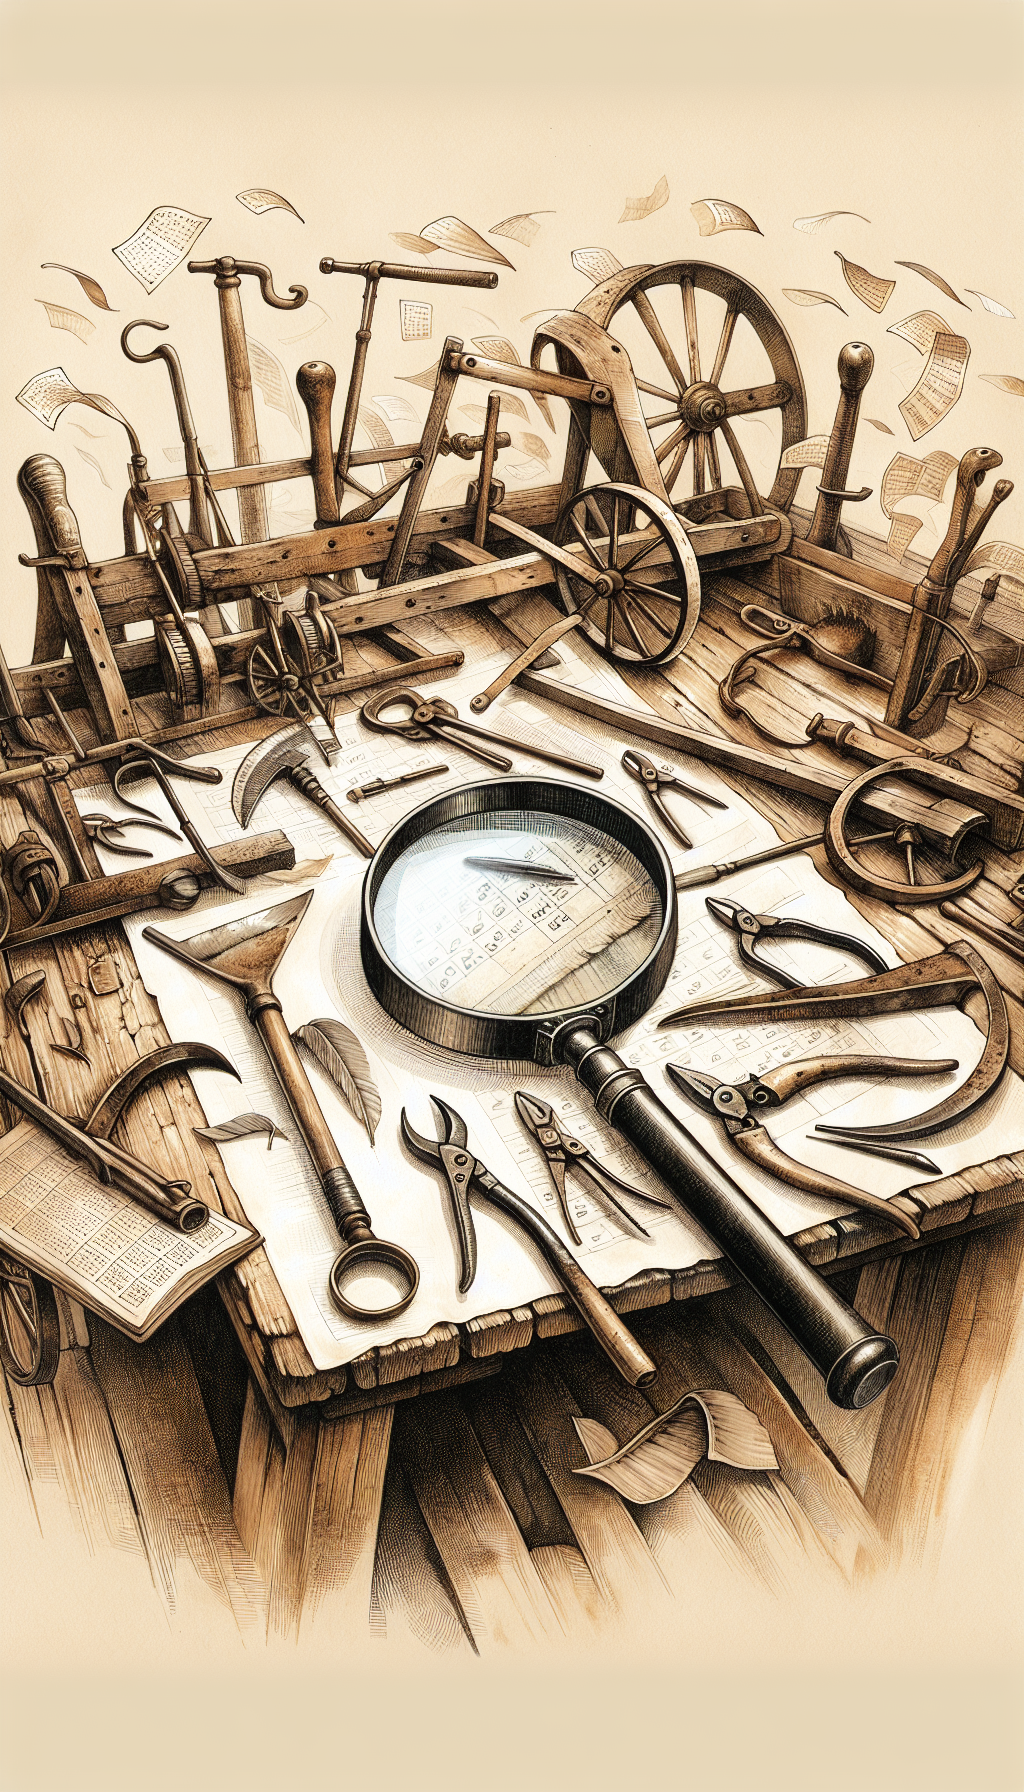 An illustration depicts a weathered wooden workbench, scattered with a variety of antique farm tools—rusty plows, scythes, and yokes. A magnifying glass hovers over the tools, focusing on distinct marks and patinas, while translucent calendar pages flutter in the background, symbolizing the passage of time. A style mix of sepia-toned watercolor and crisp line art emphasize the blend of age and discovery.